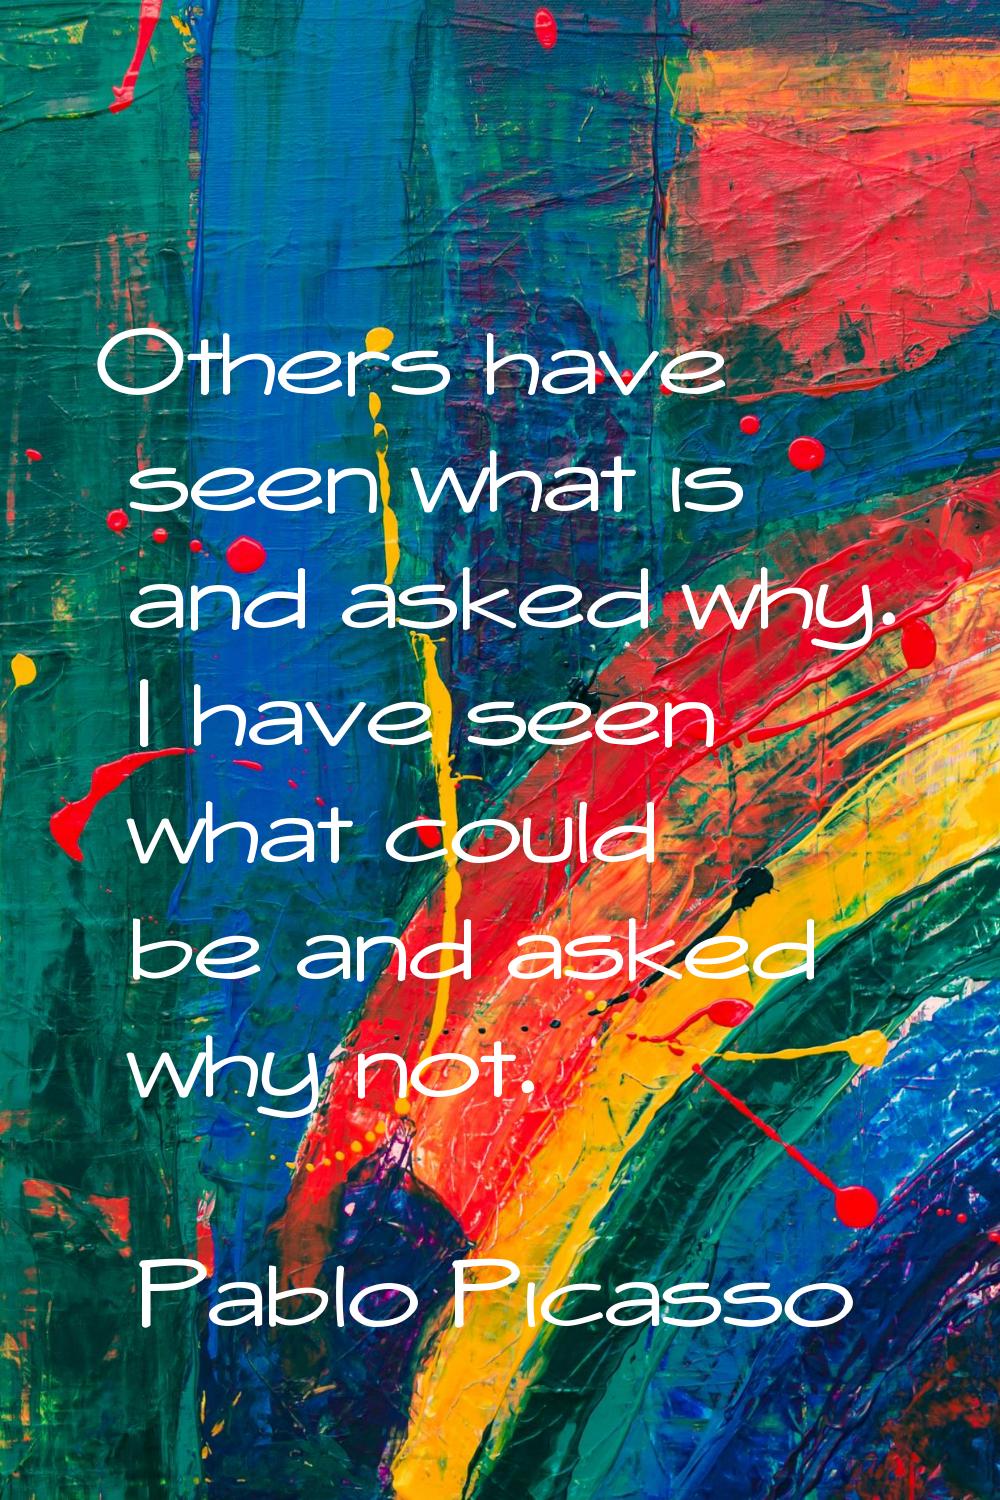 Others have seen what is and asked why. I have seen what could be and asked why not.